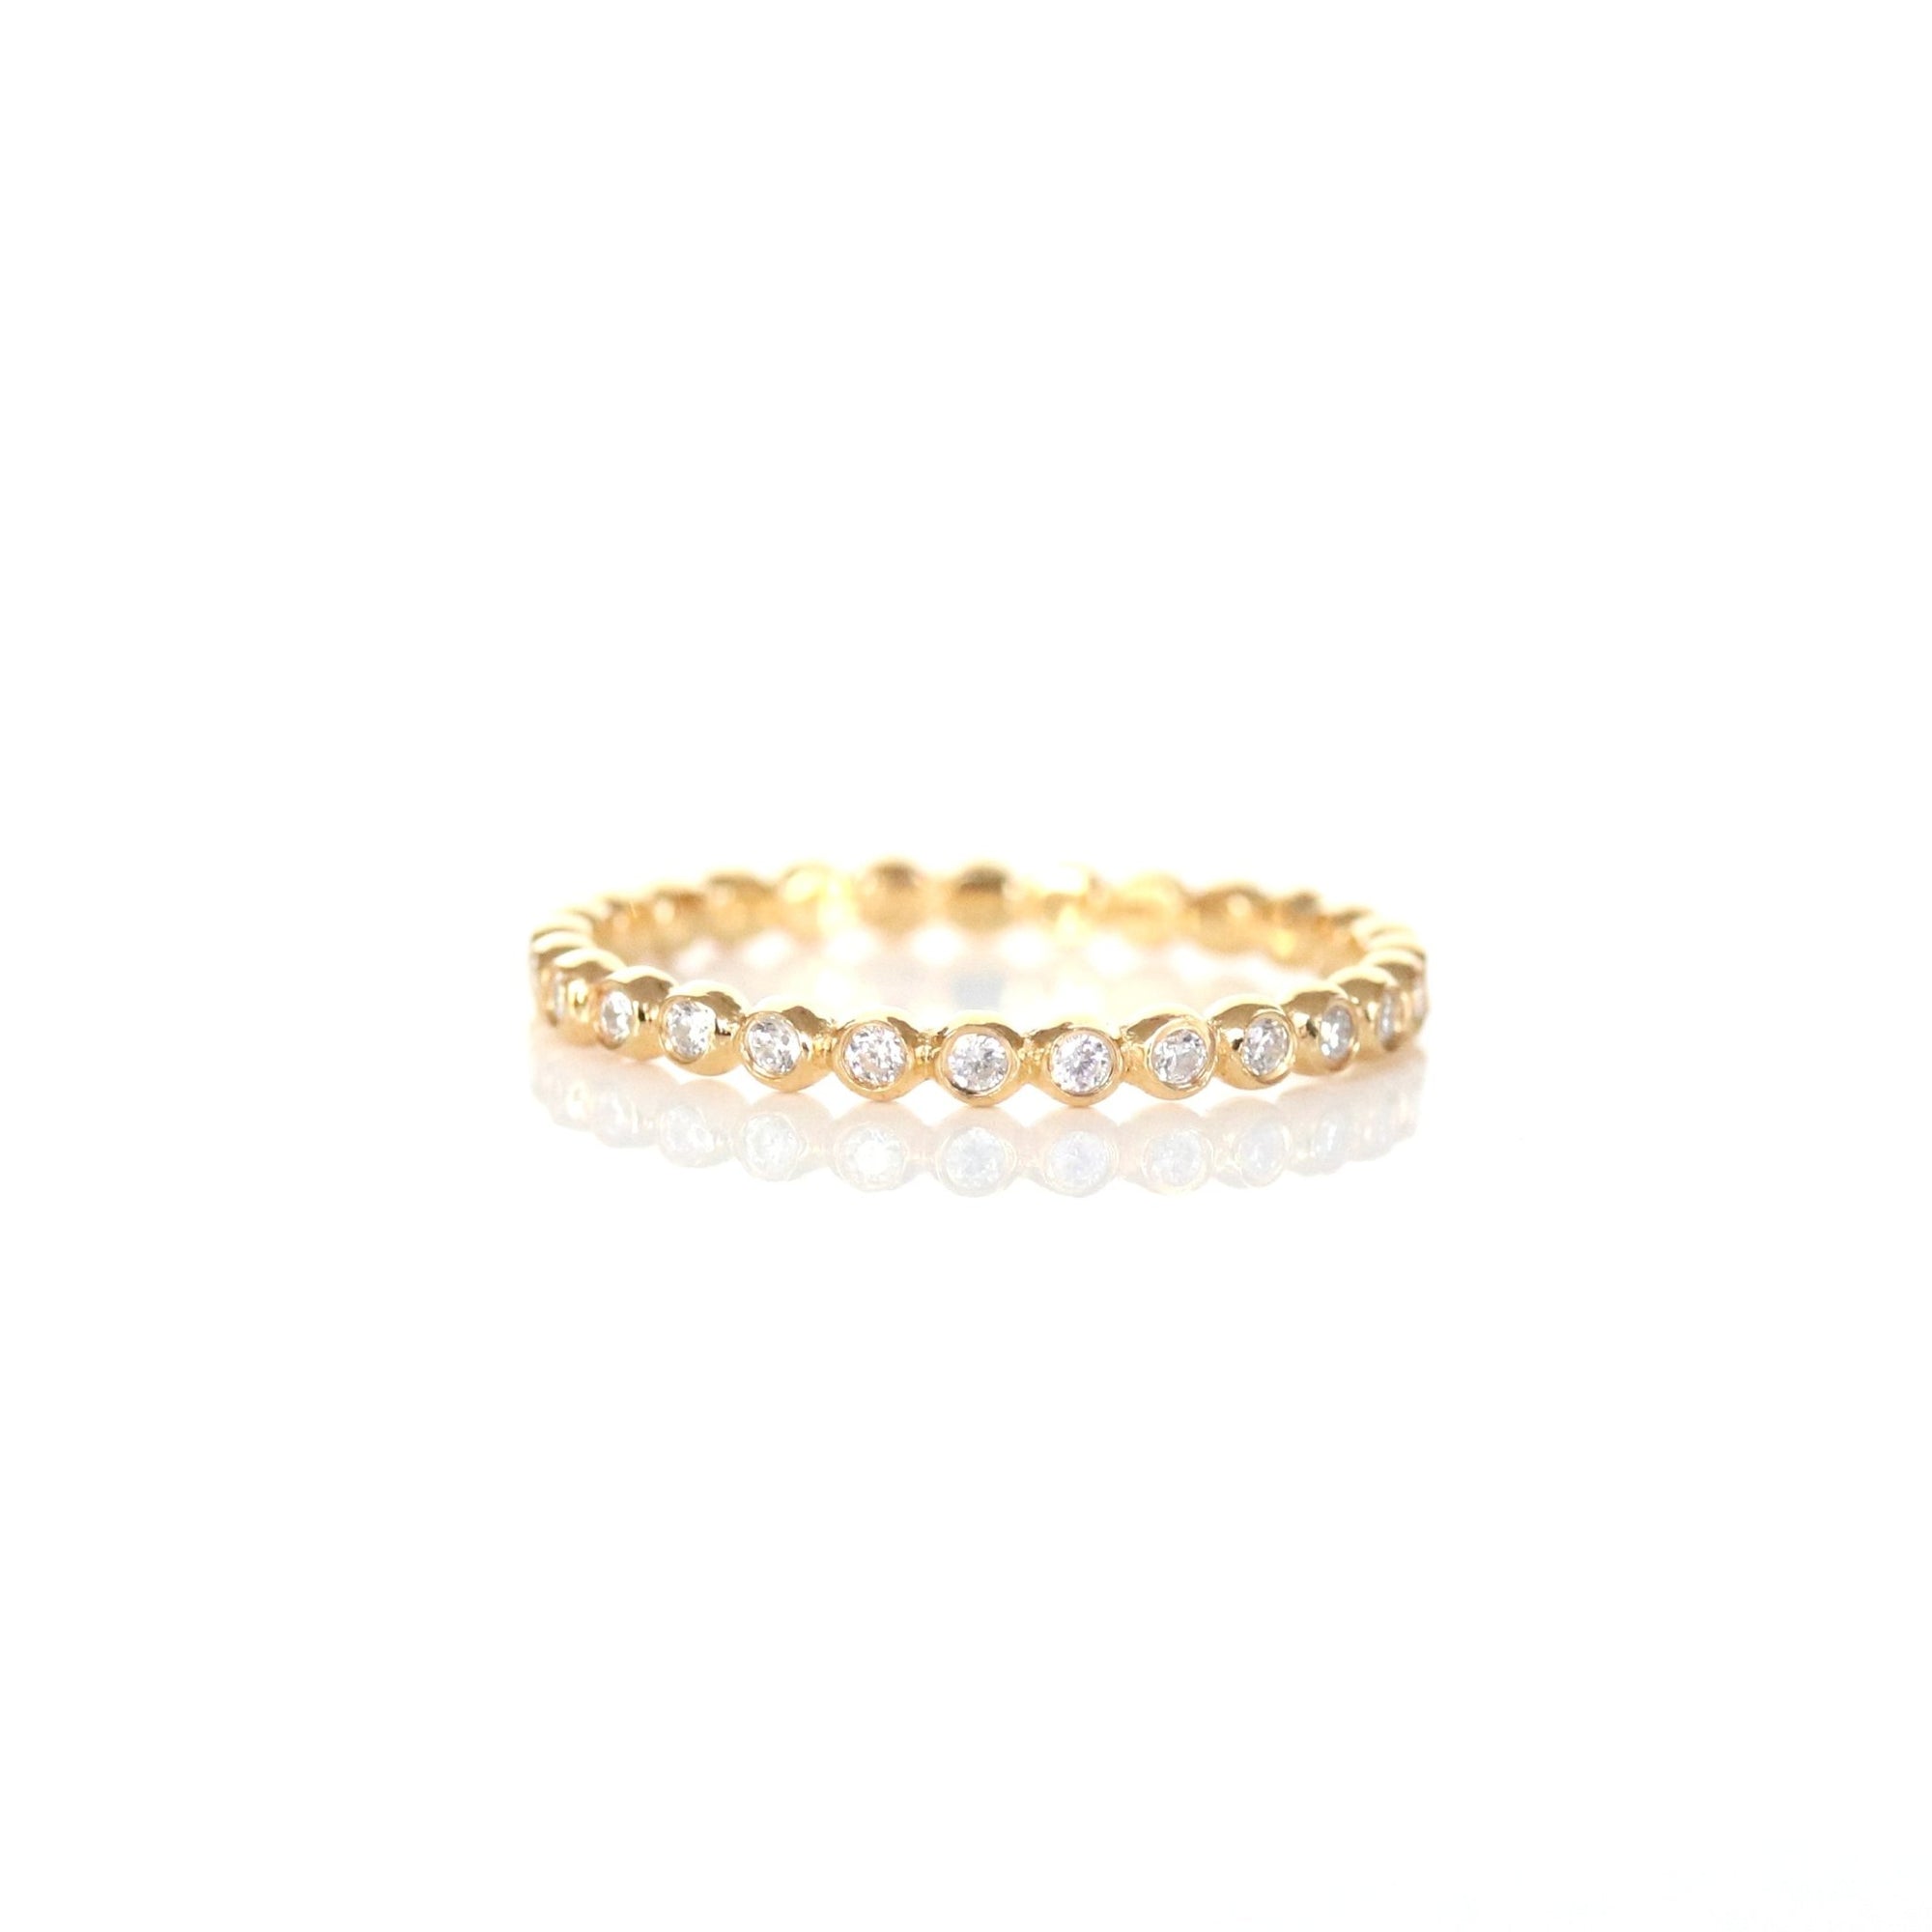 LOVE THIN DISK BAND RING - DIAMONDS & SOLID 14K GOLD - SO PRETTY CARA COTTER